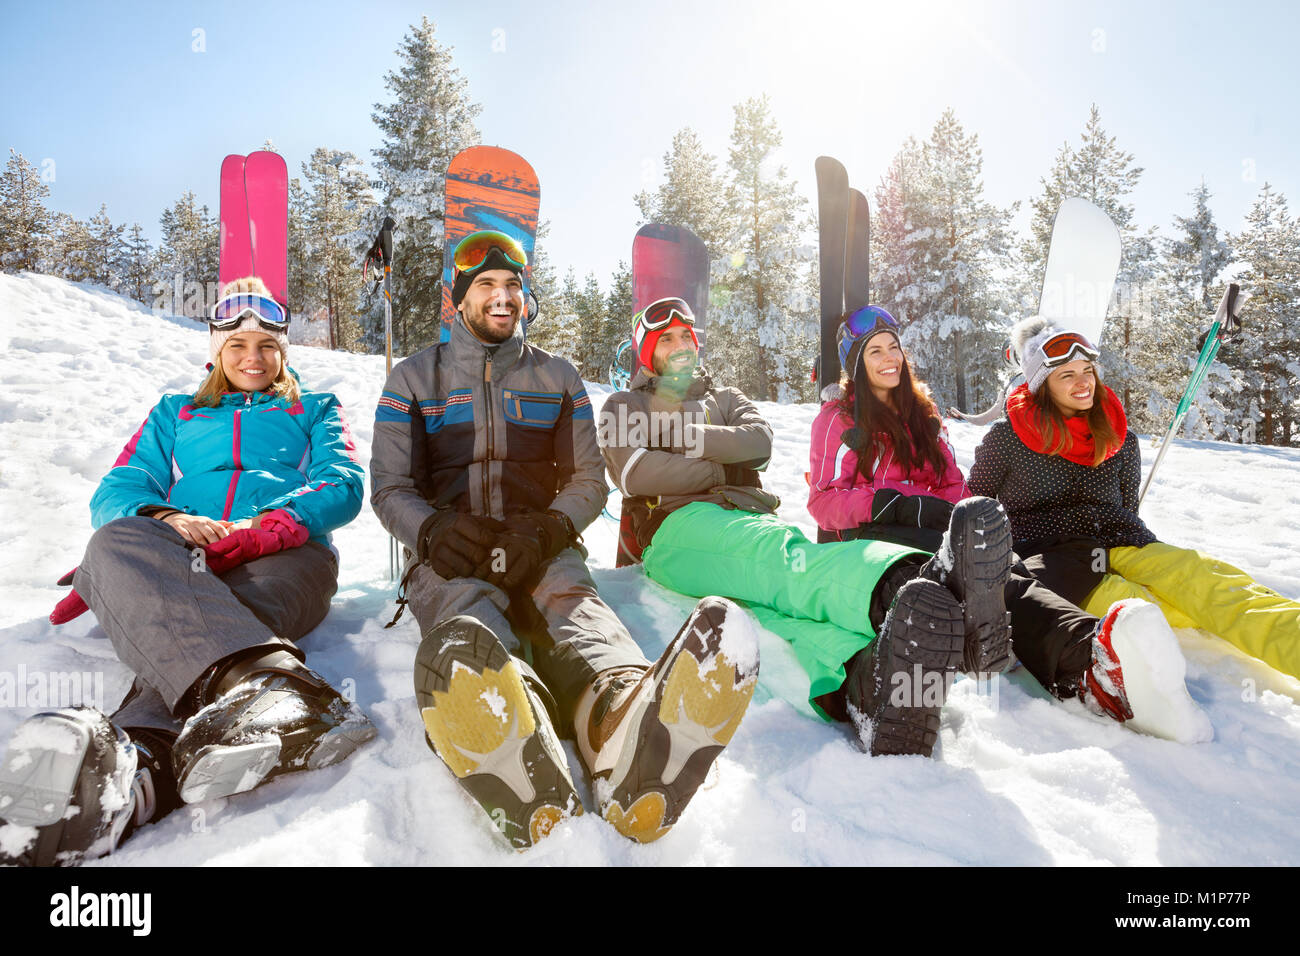 Group of skiers sitting on snow and resting Stock Photo